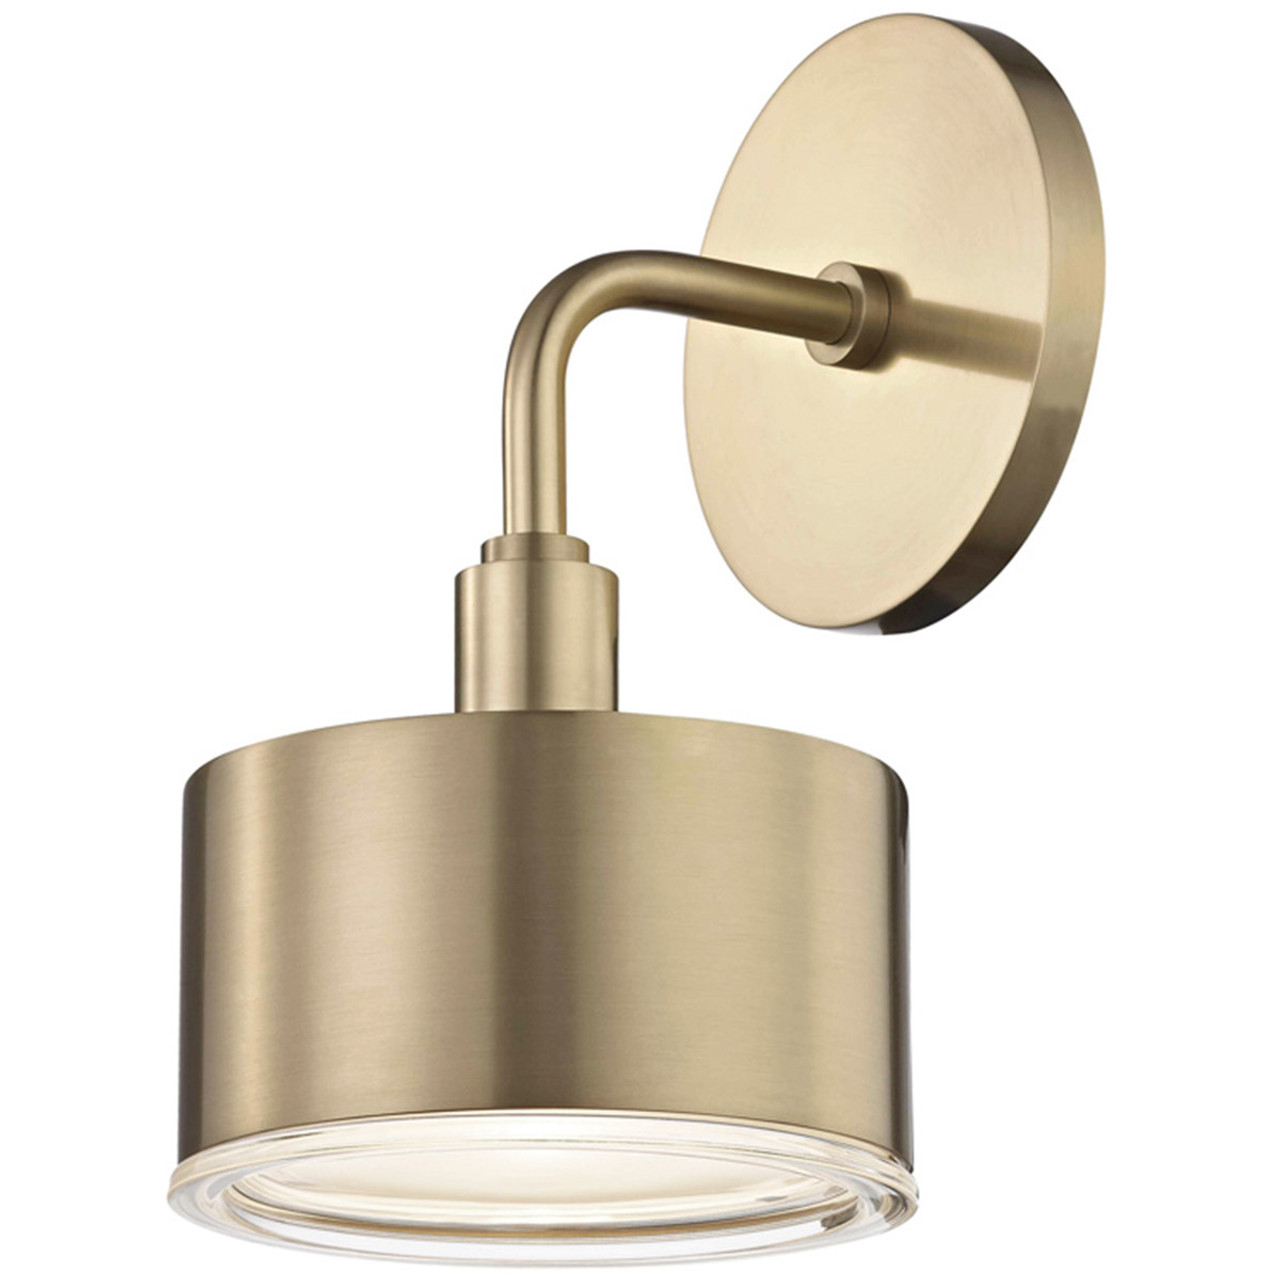 Mitzi Nora Light Wall Sconce in Aged Brass H159101-AGB